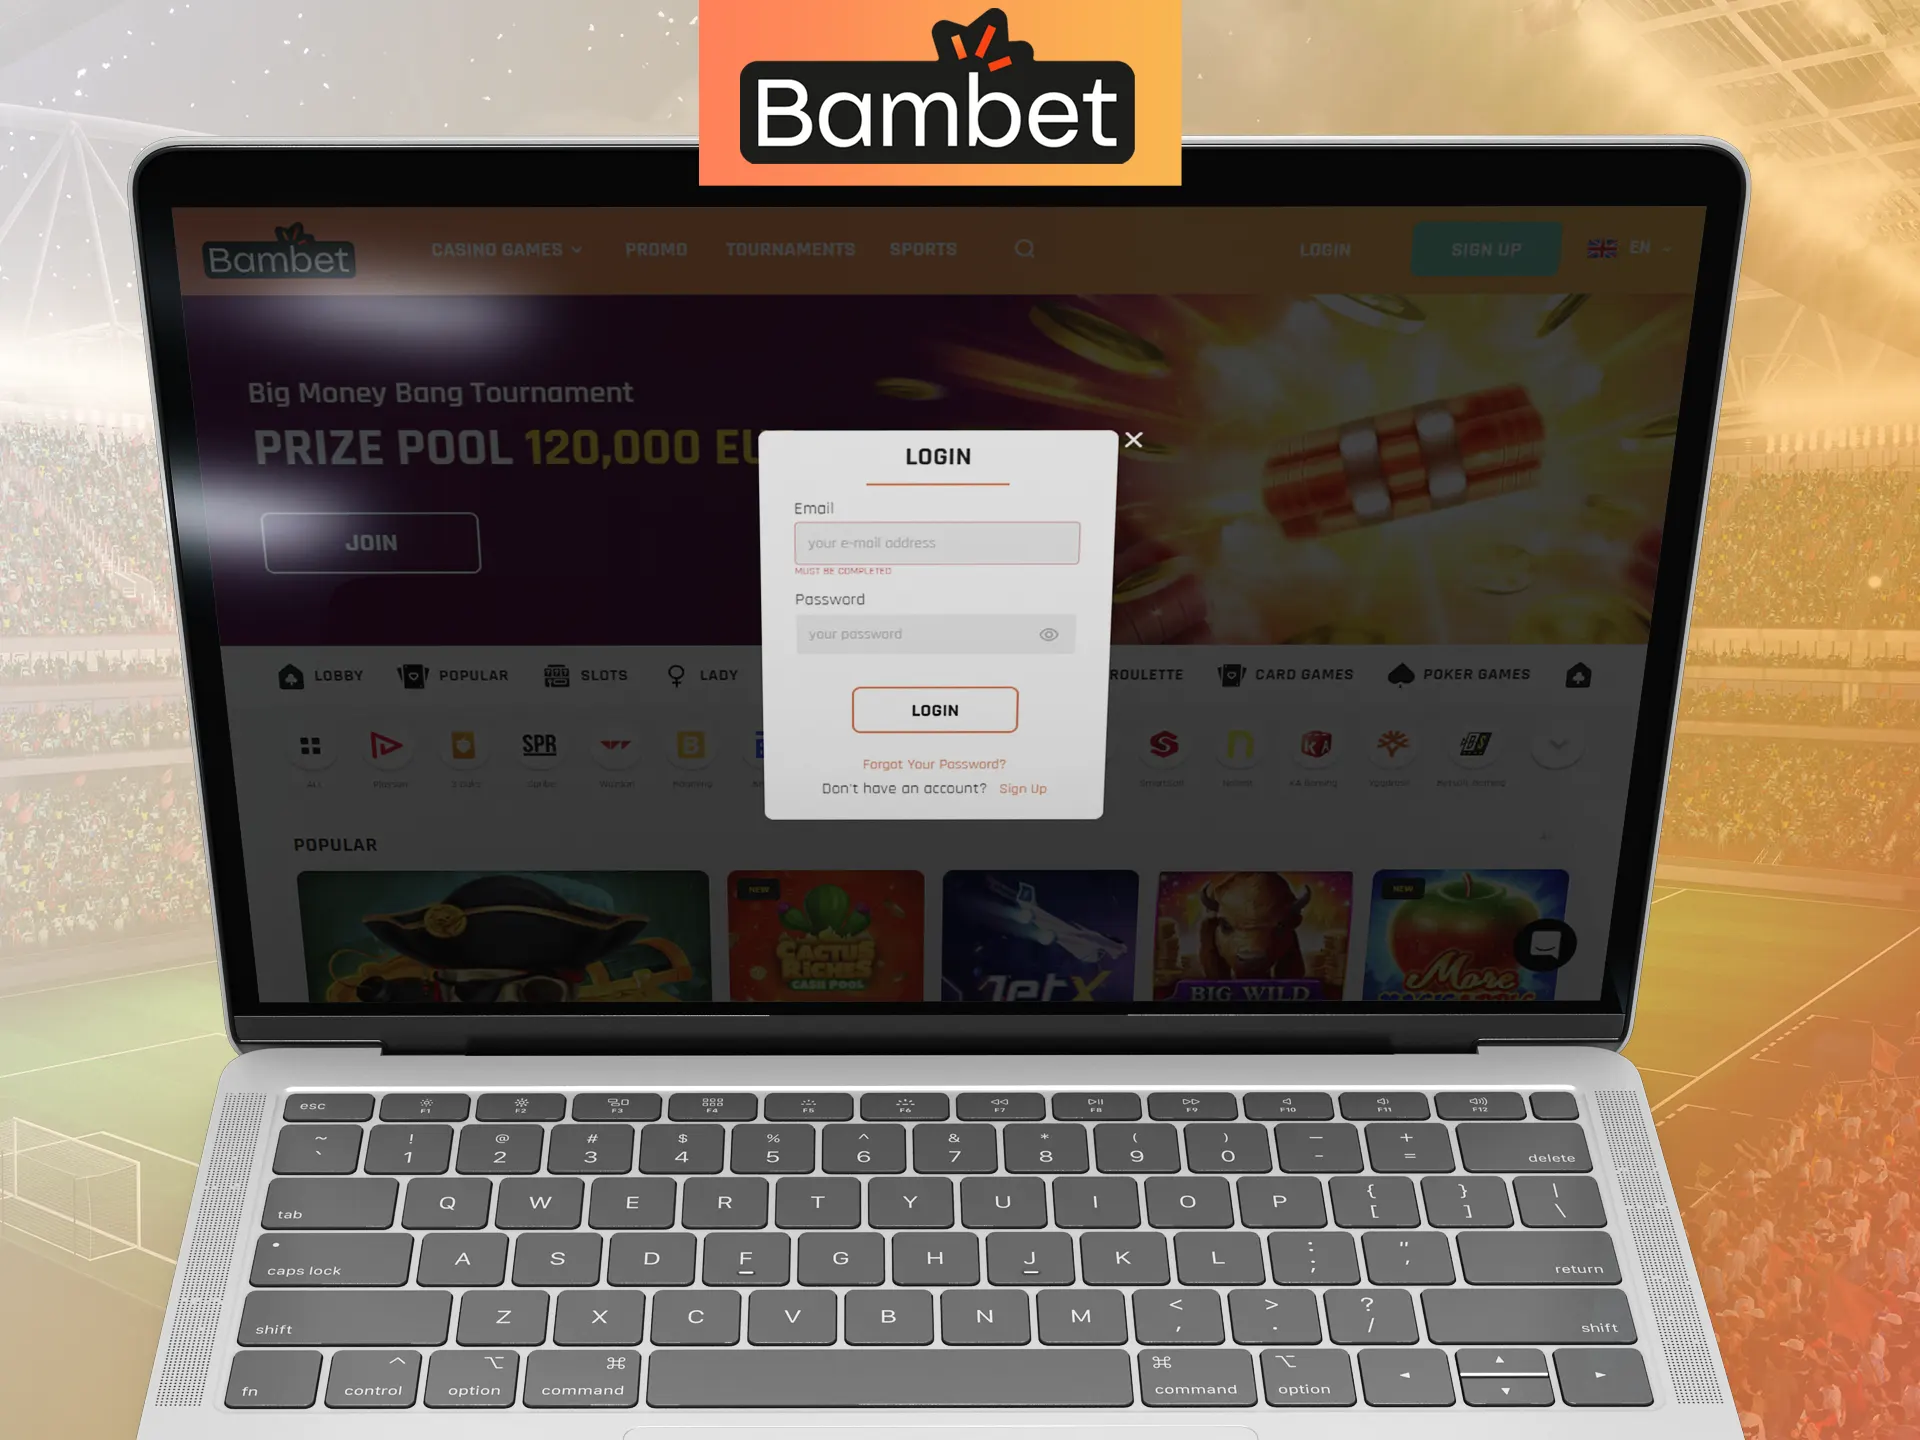 At Bambet, log into your account easily and play.